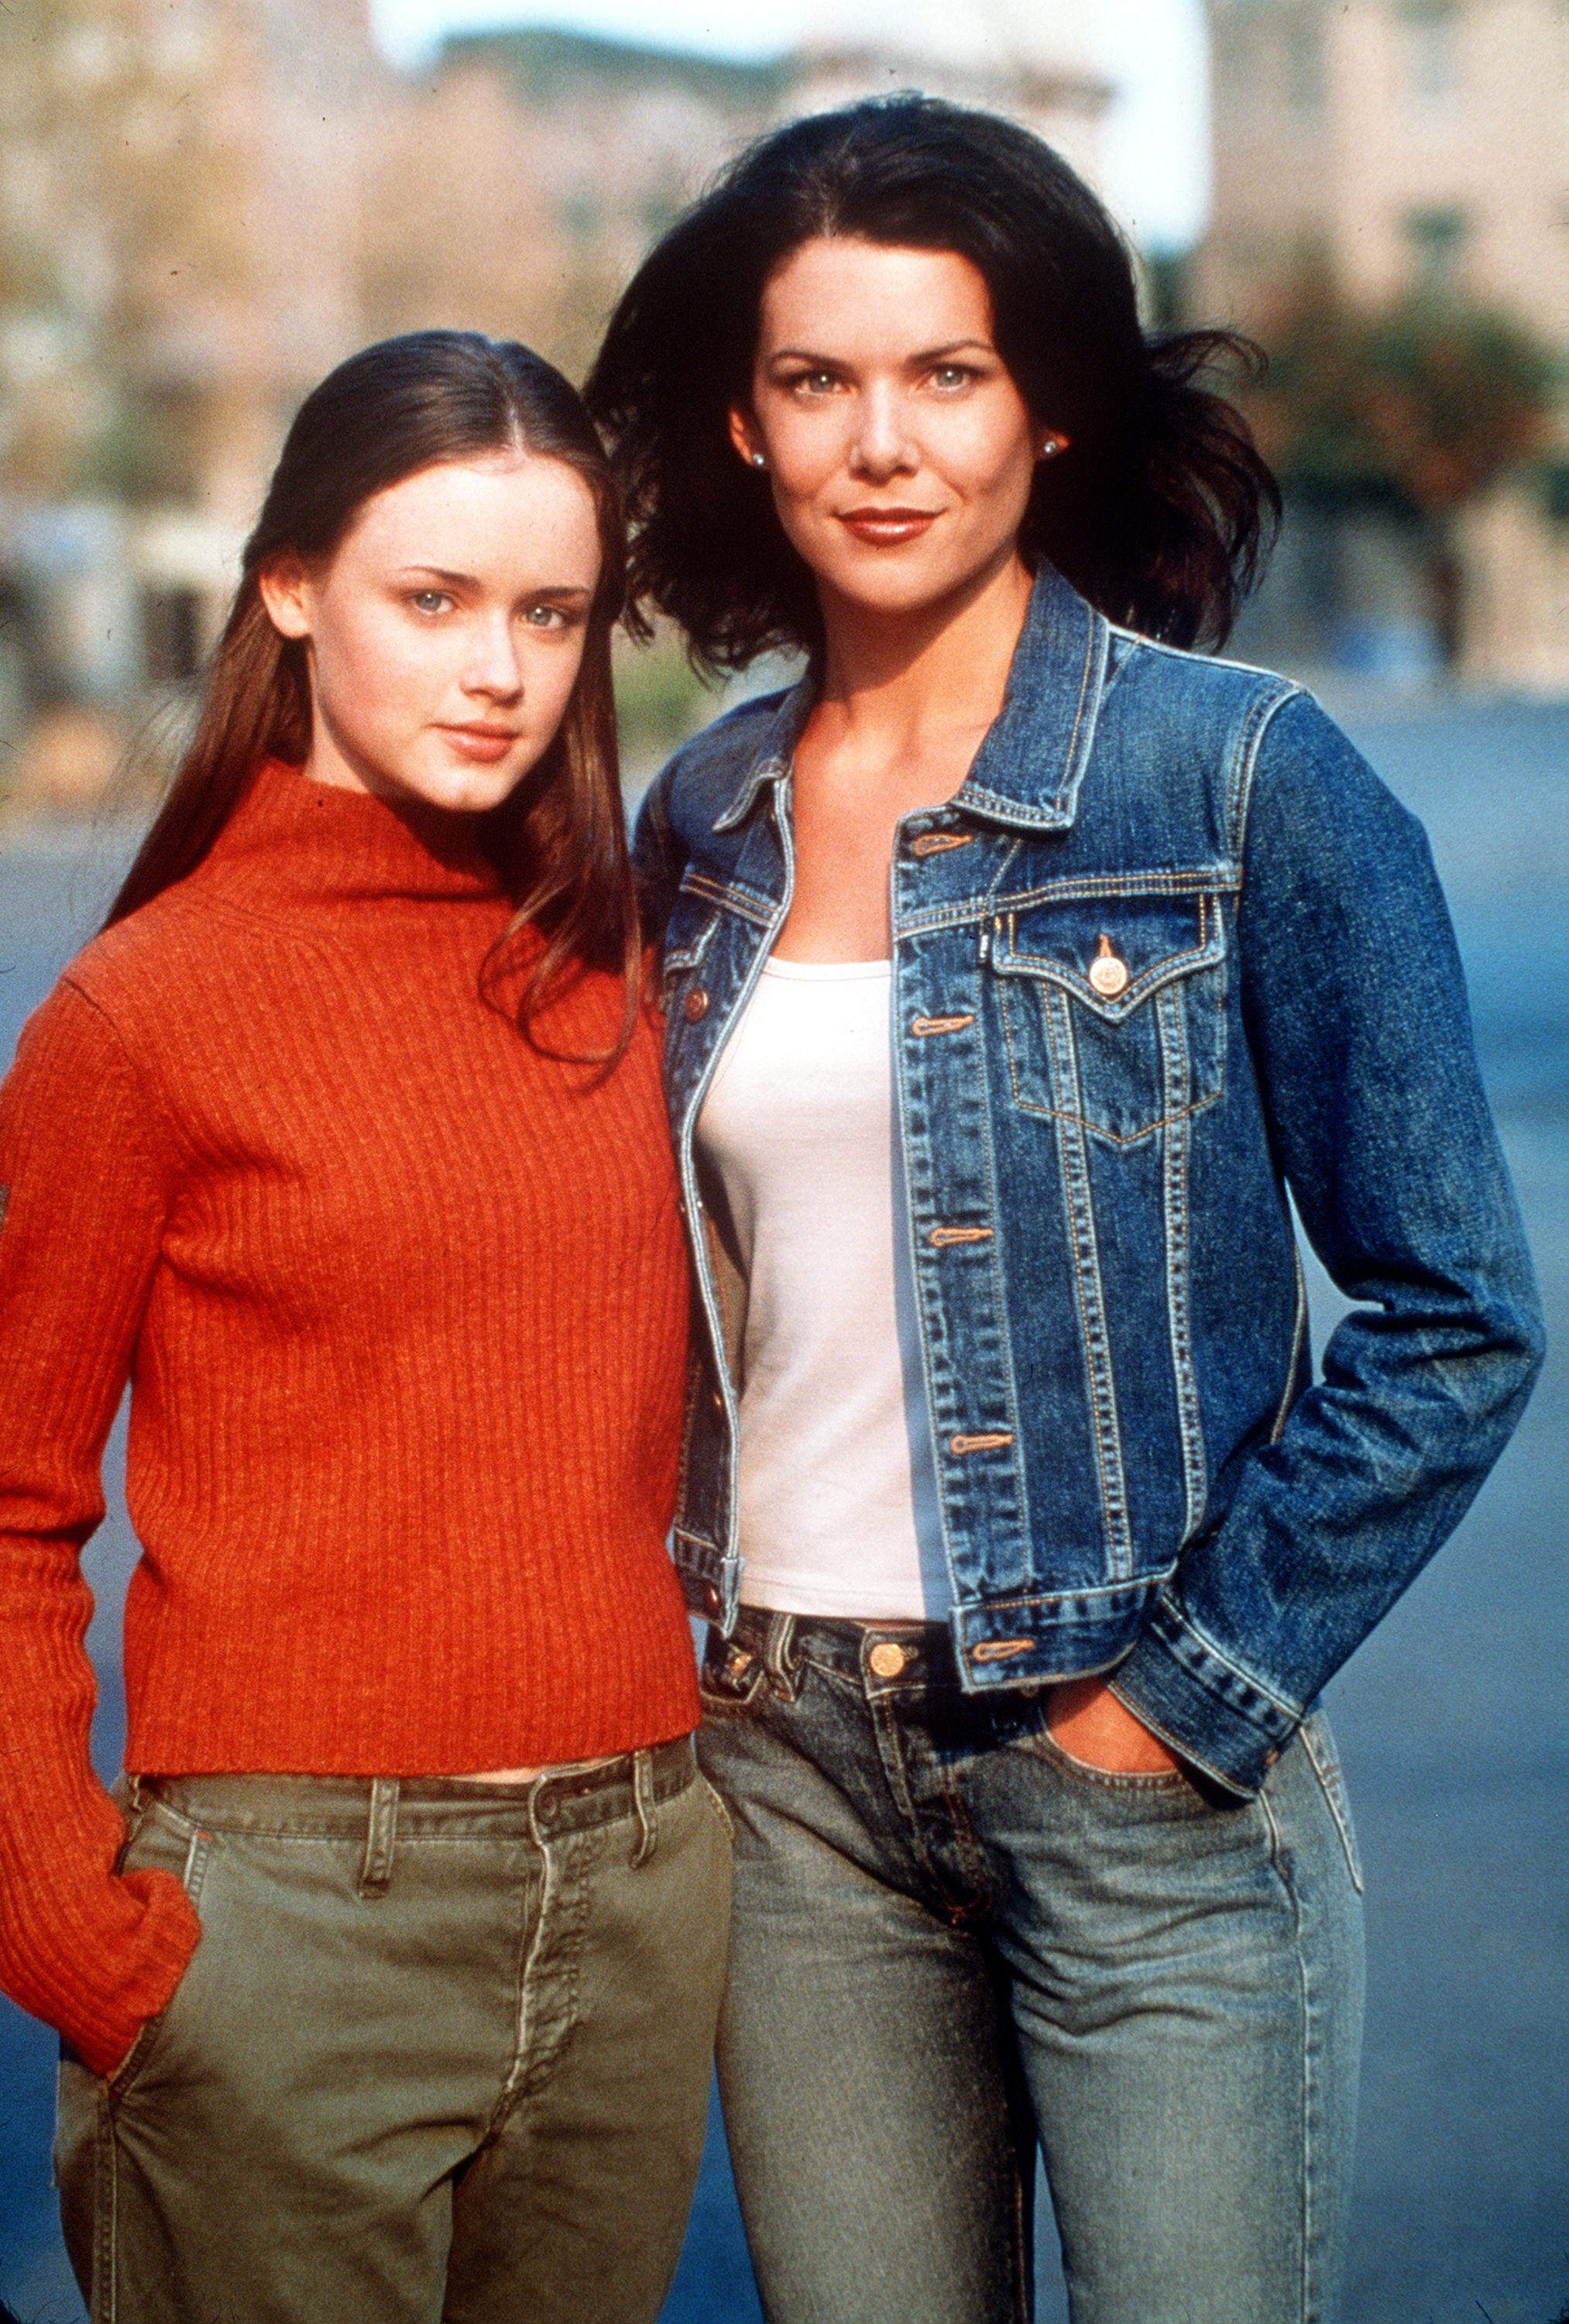 Gilmore Girls launched onto our screens in 2000 before winding up in 2007